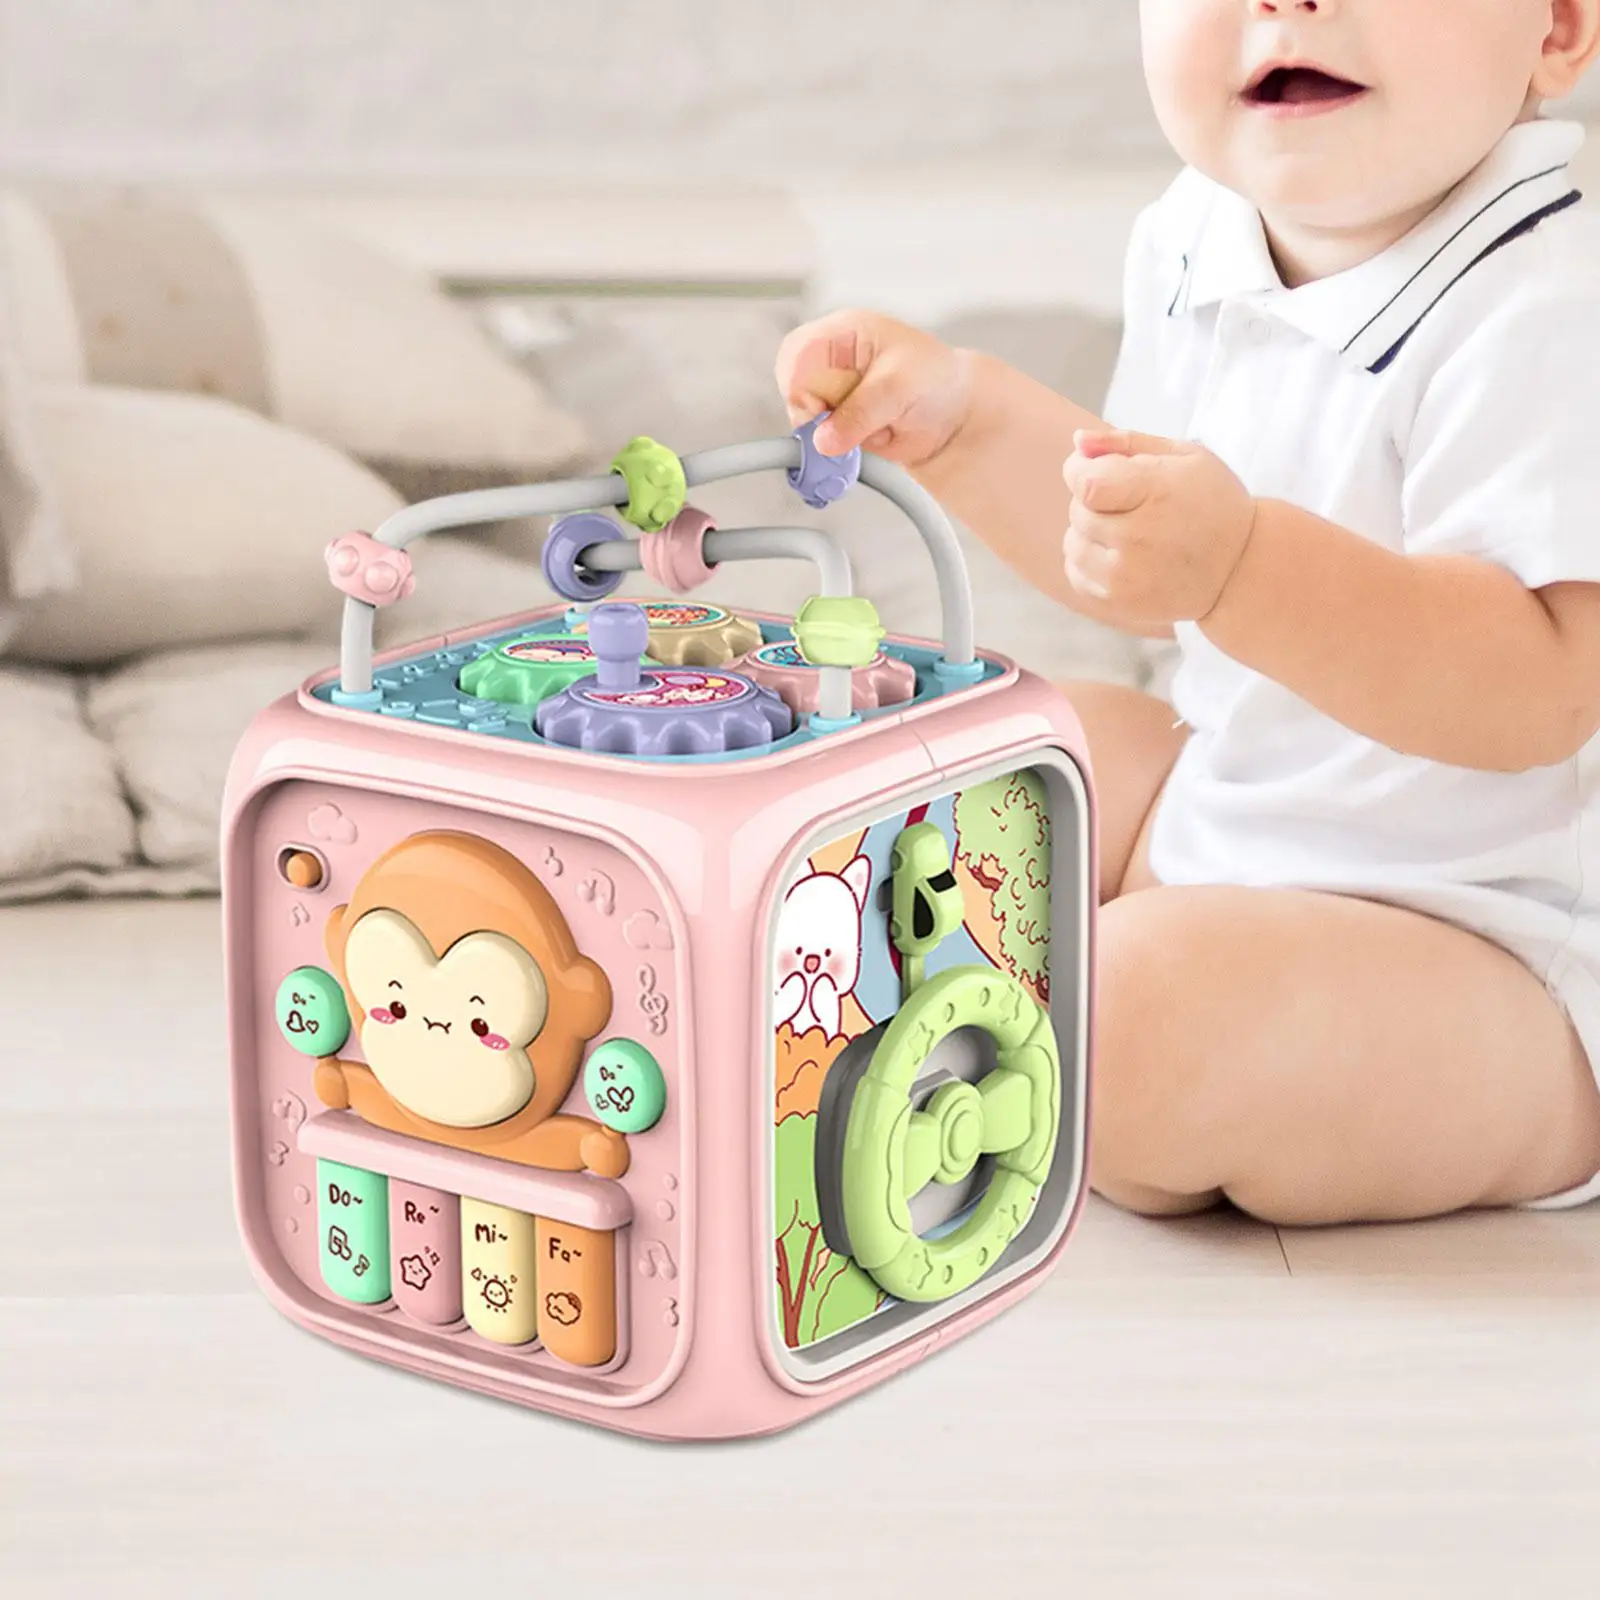 Busy Cube for Kids Early Educational Learning Toy with Sound and Music for Infants 18-36 Month Children Preschool Birthday Gift